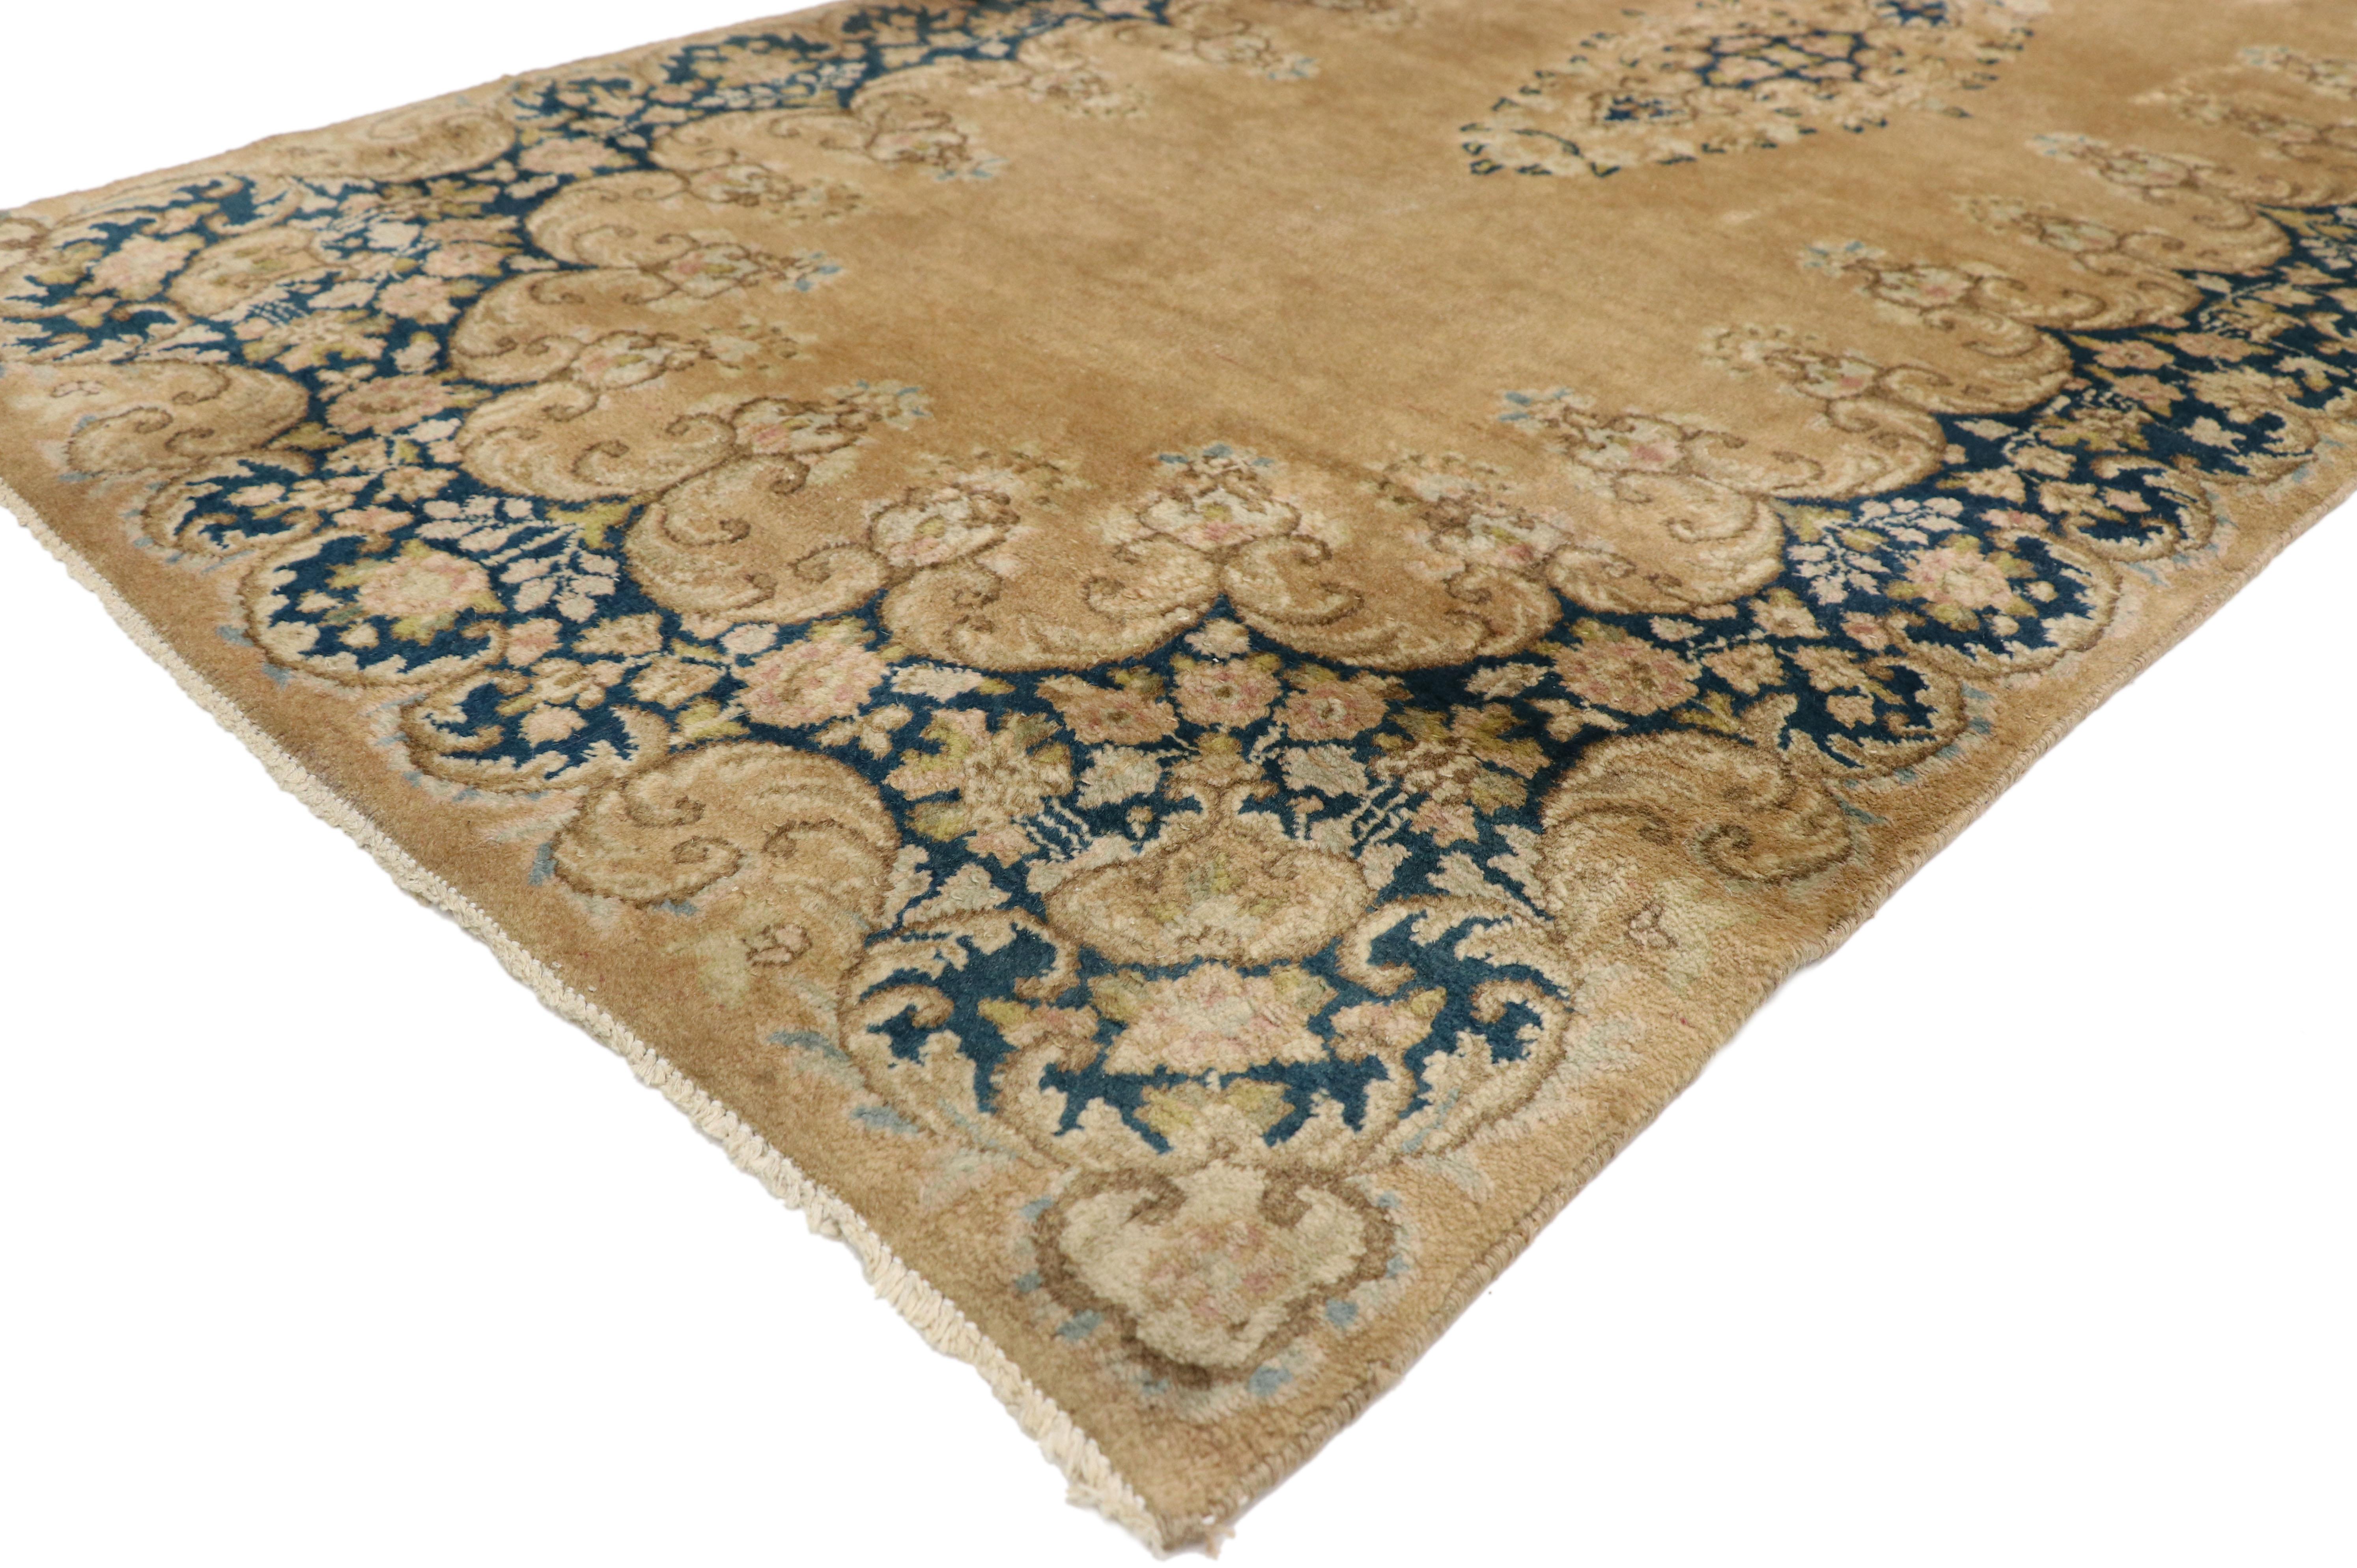 73660 Antique Persian Kerman Rug Runner, 03'03 x 17'06. 
This vintage Persian Kerman hallway runner, crafted meticulously from hand-knotted wool, boasts captivating features such as an ink blue floral medallion at the center, complemented by